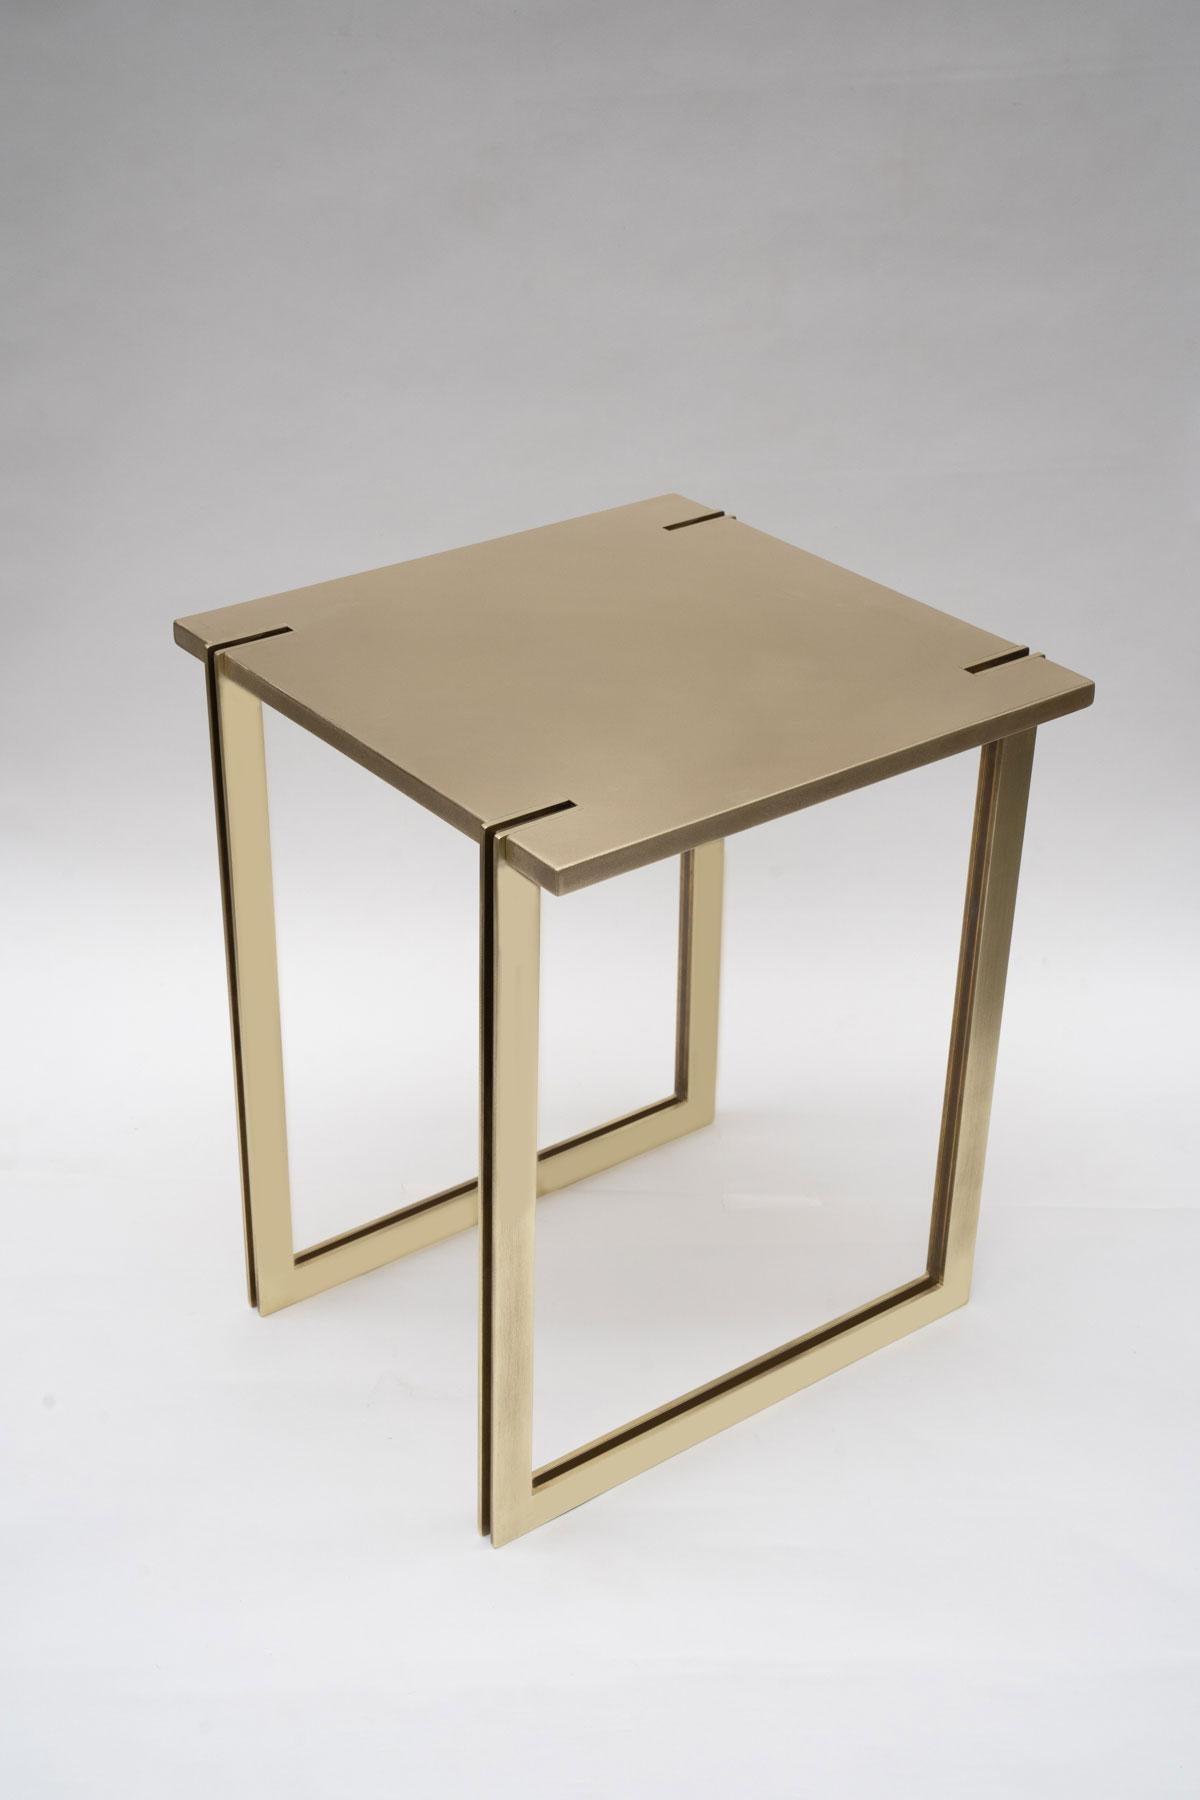 NINA side table legs are inlayed into the table top, sitting flush with the satin brass top surface and extruding 1/4